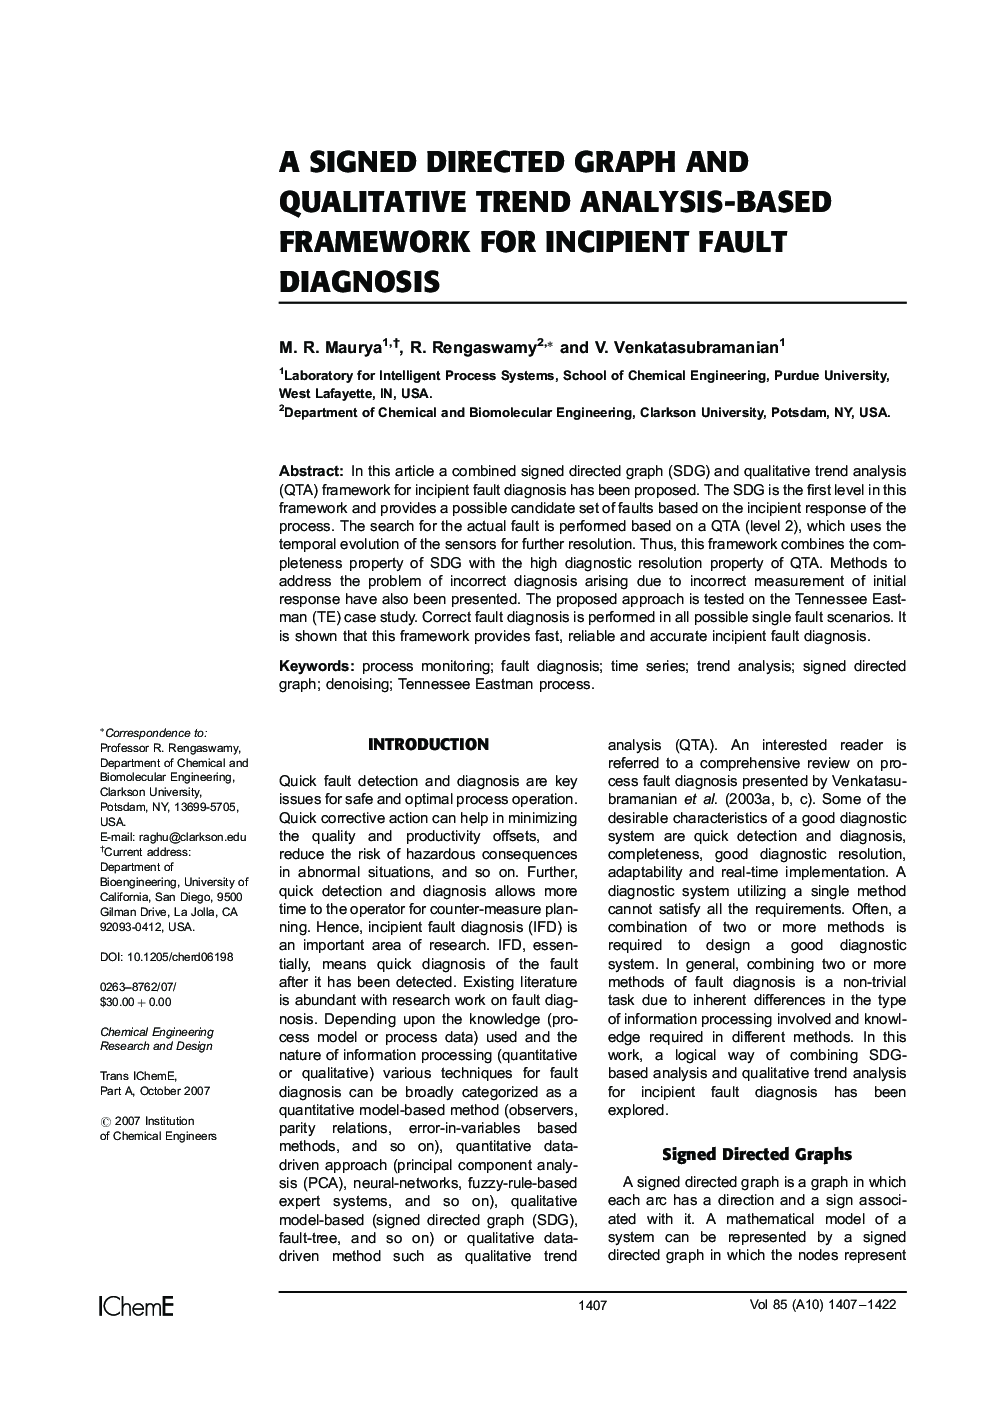 A Signed Directed Graph and Qualitative Trend Analysis-Based Framework for Incipient Fault Diagnosis